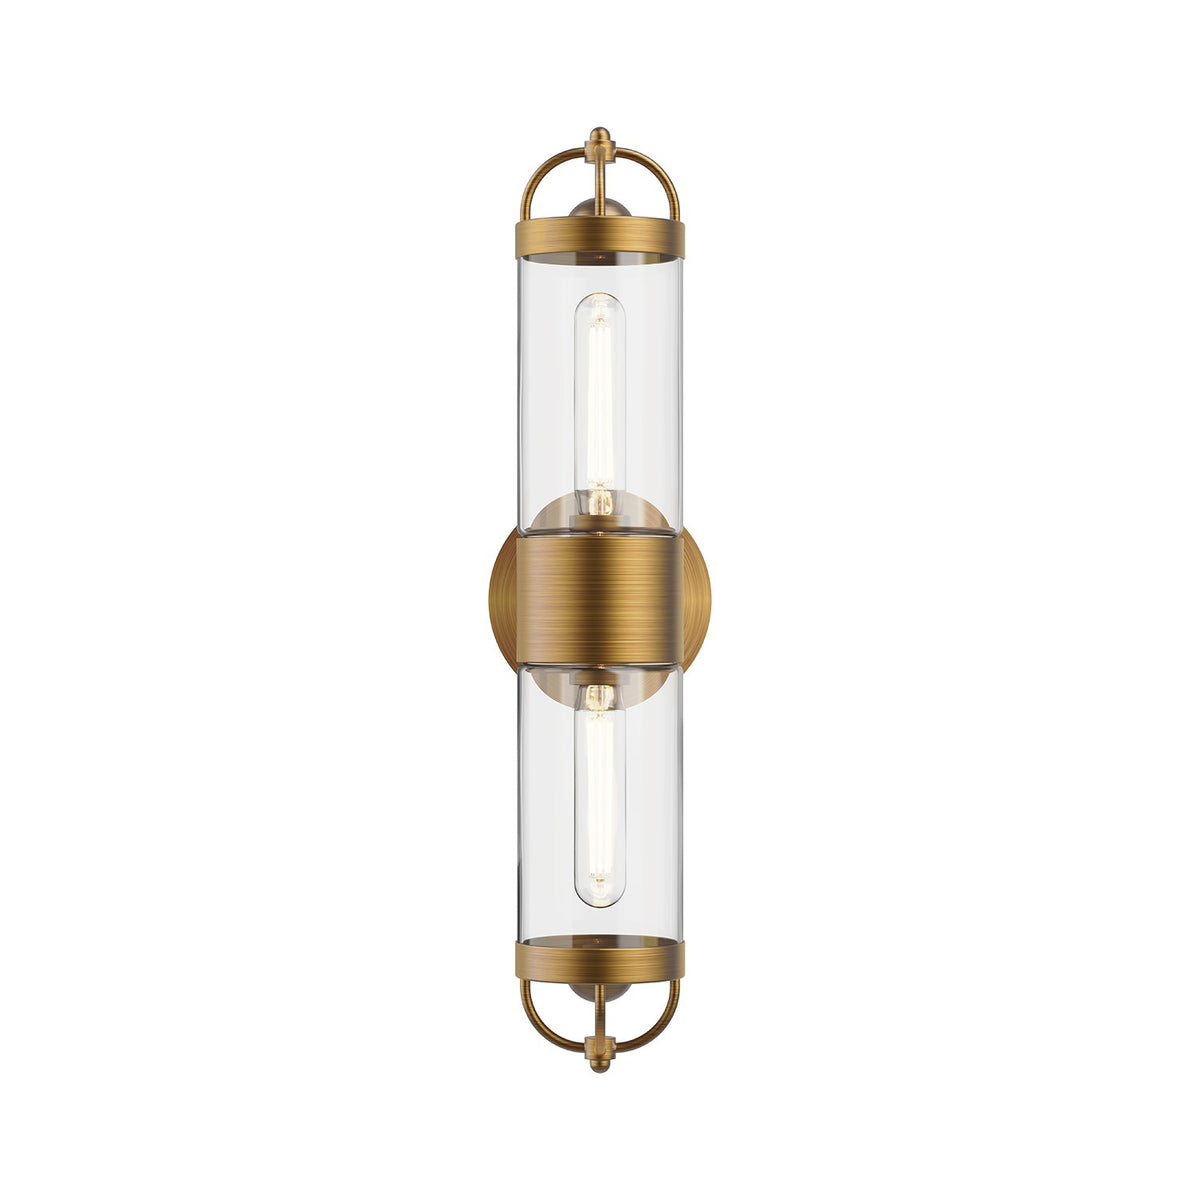 Alora Canada - WV461102AG - Two Light Wall Sconce - Lancaster - Aged Gold